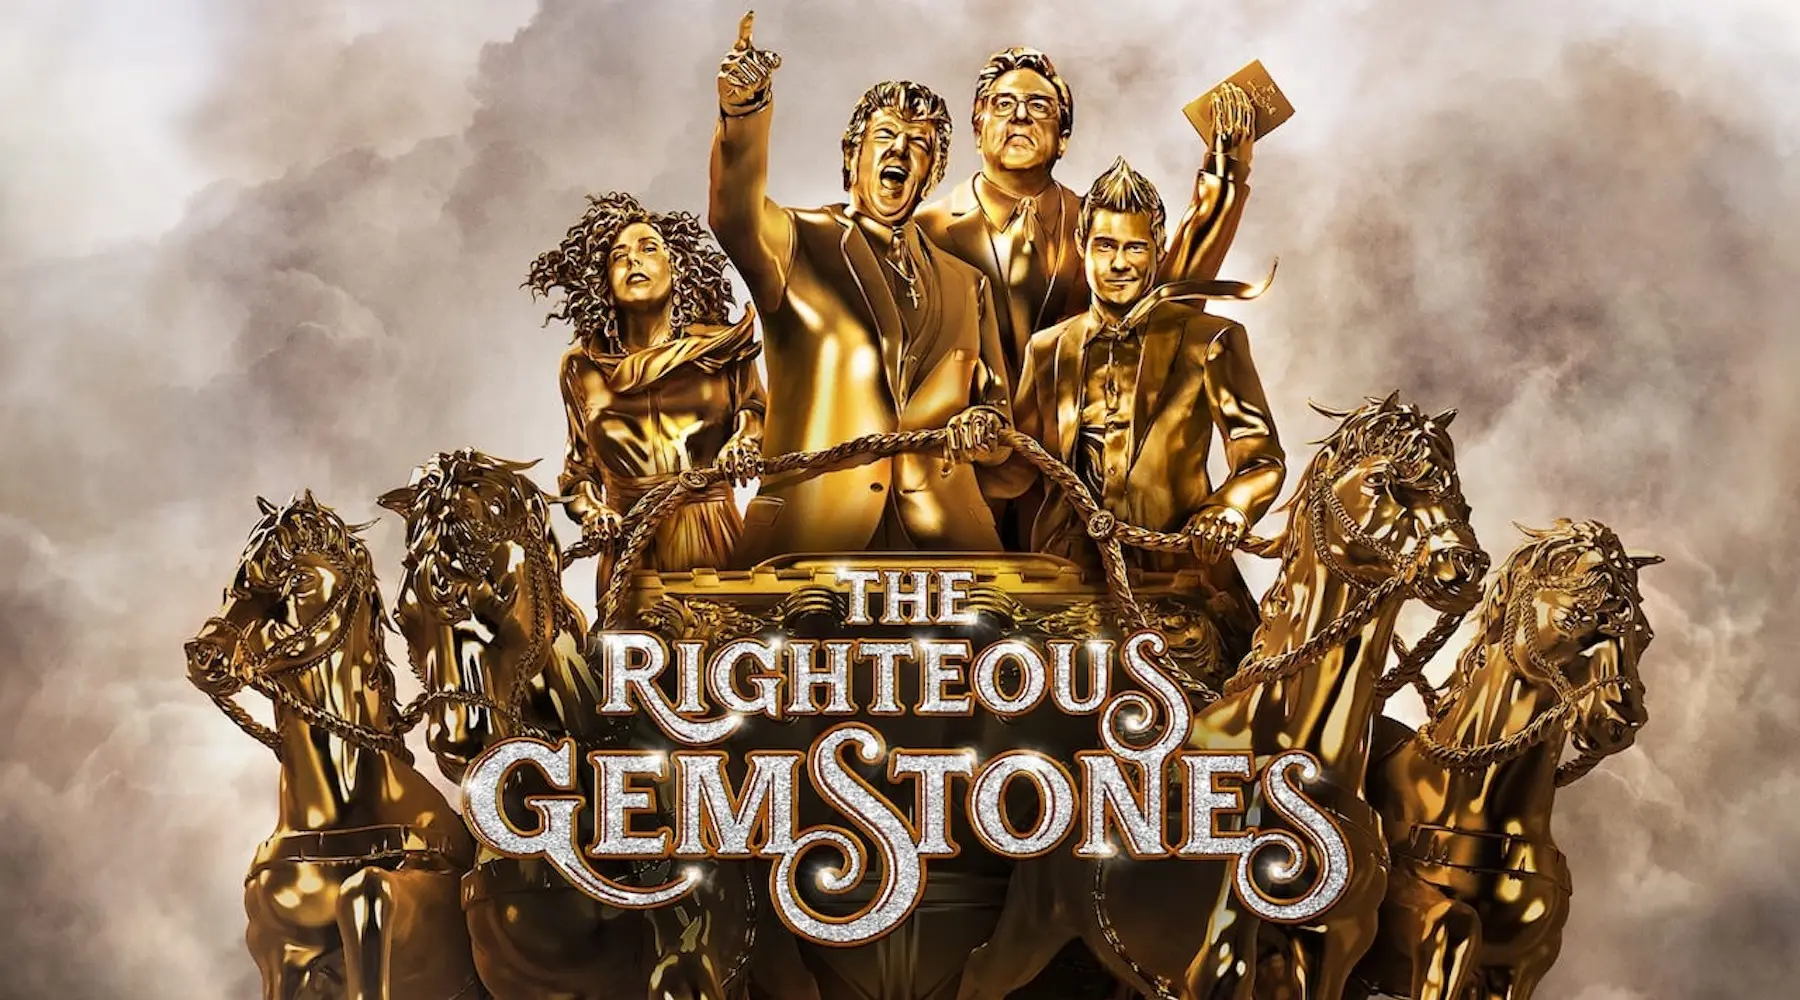 The Righteous Gemstones image